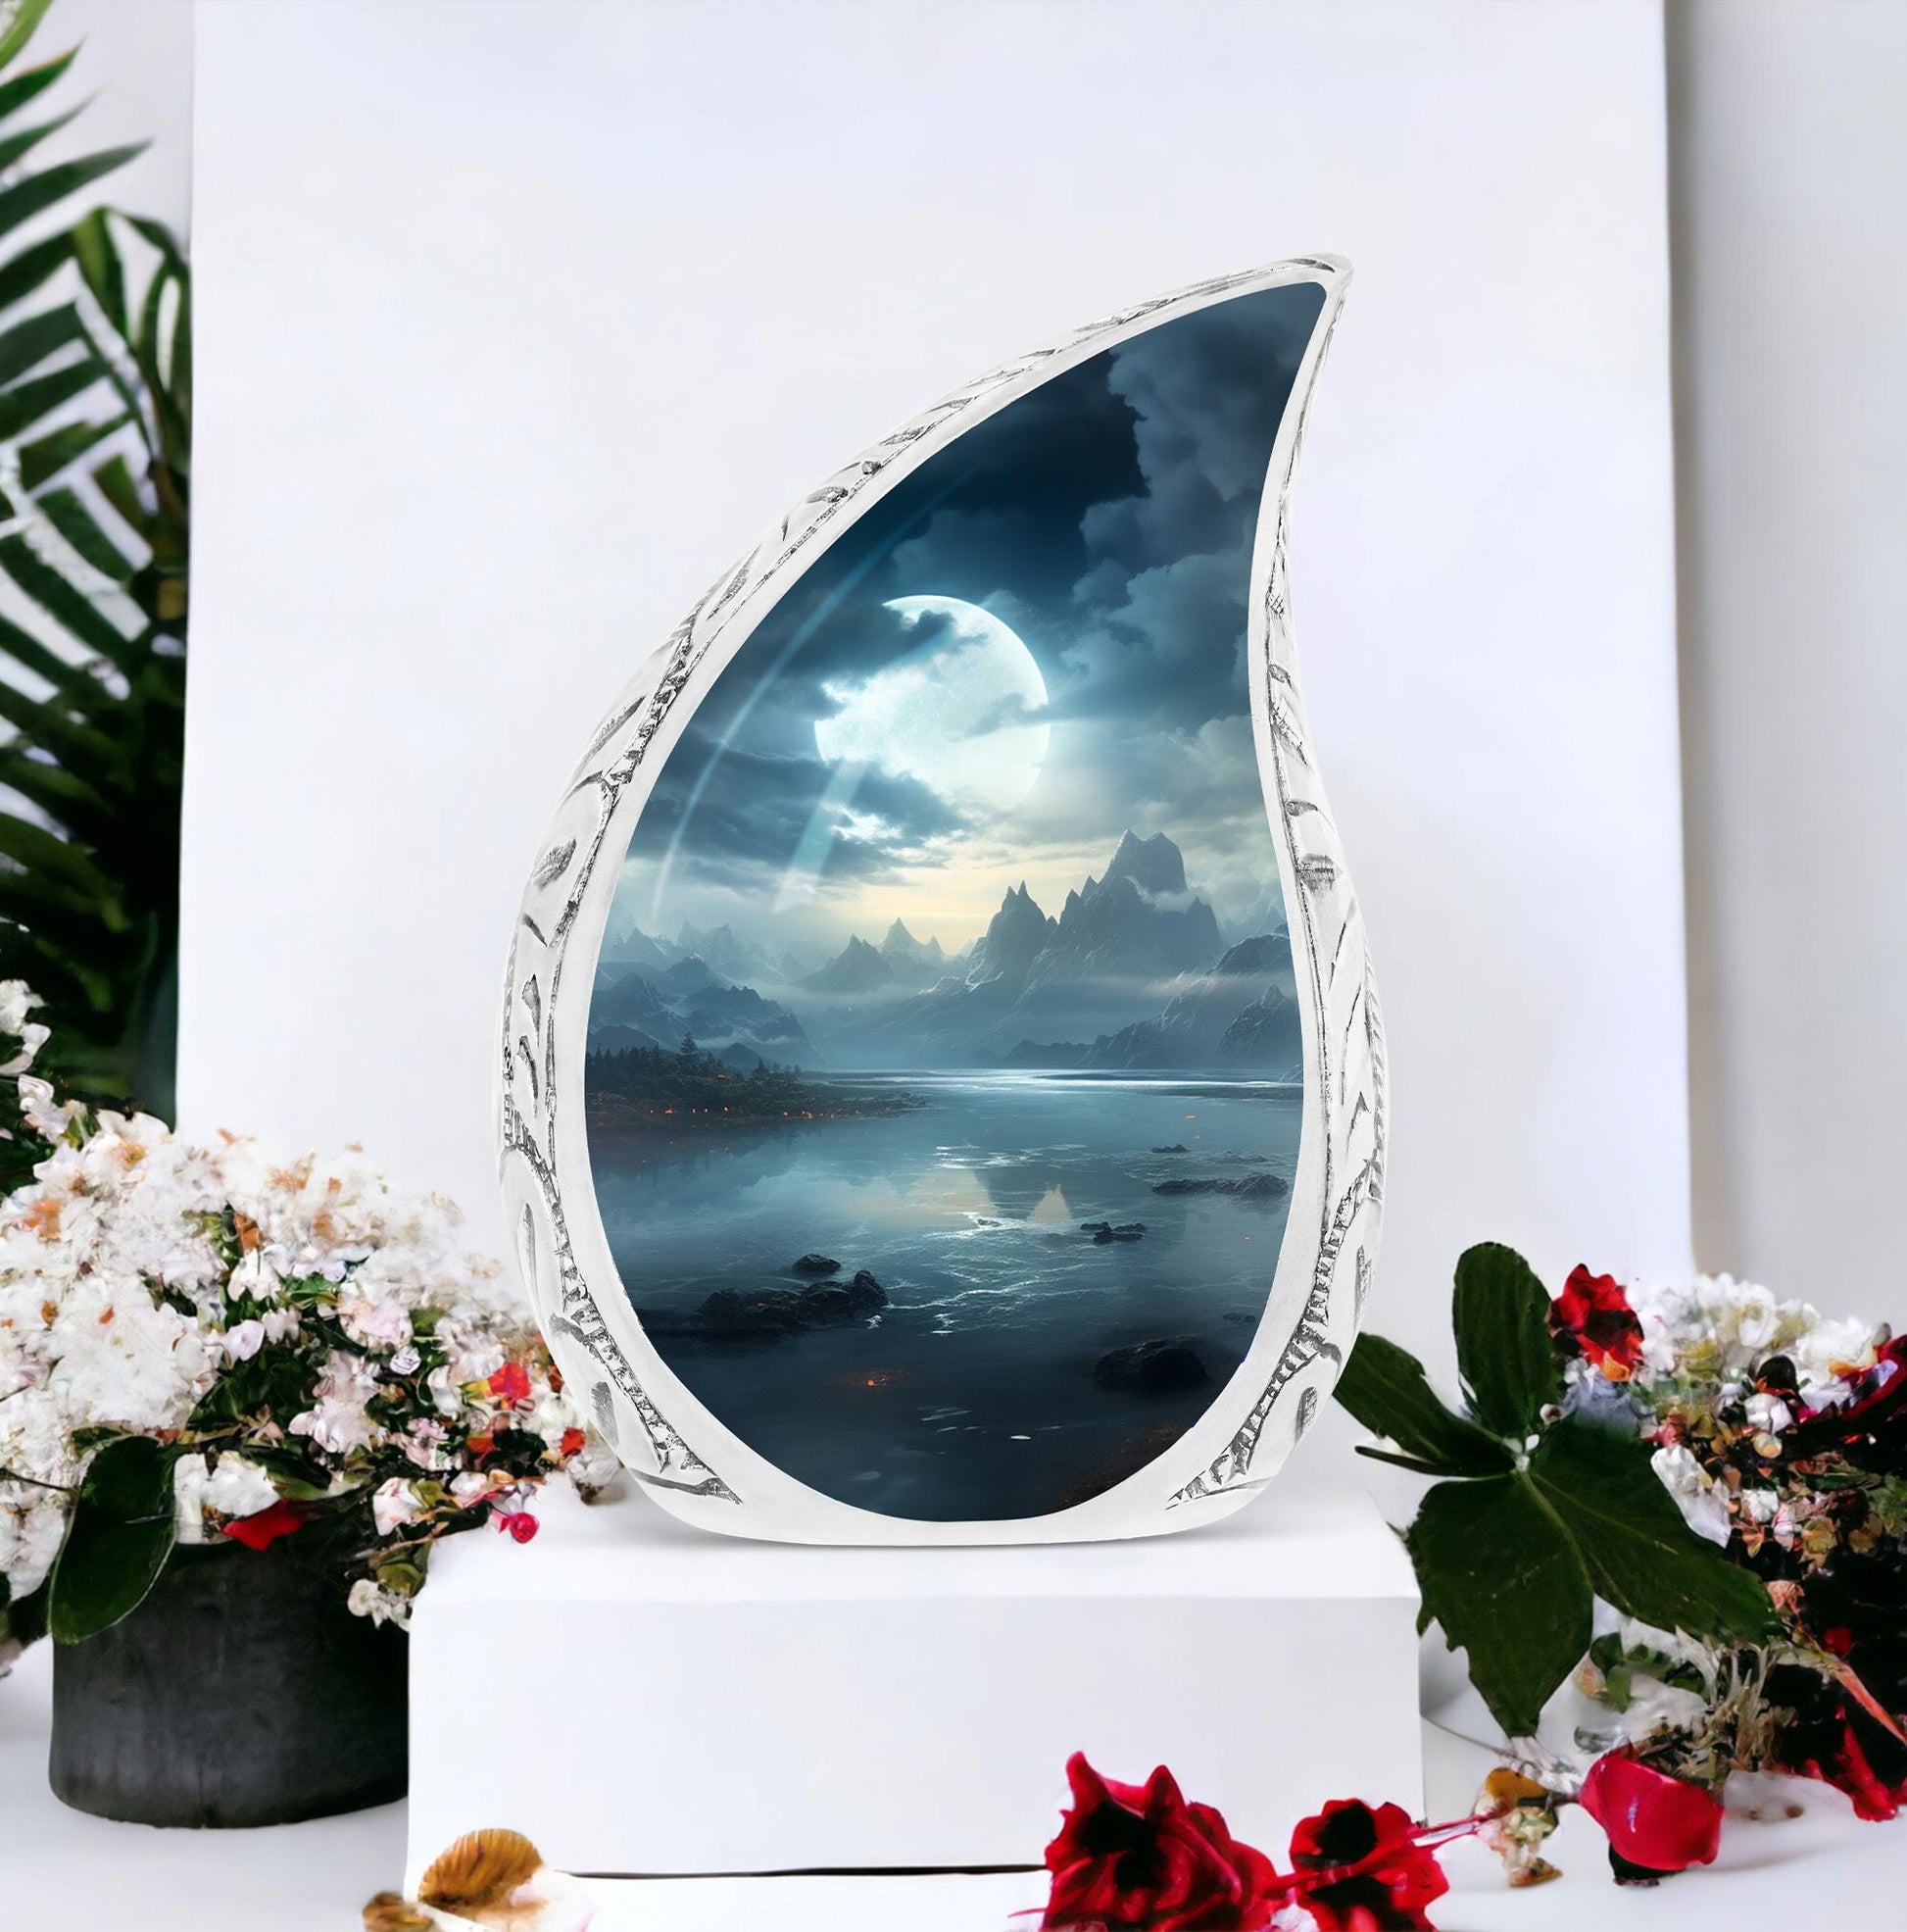 Medium-sized Moonlit Urns for men's ashes, suitable for funeral and burial purposes